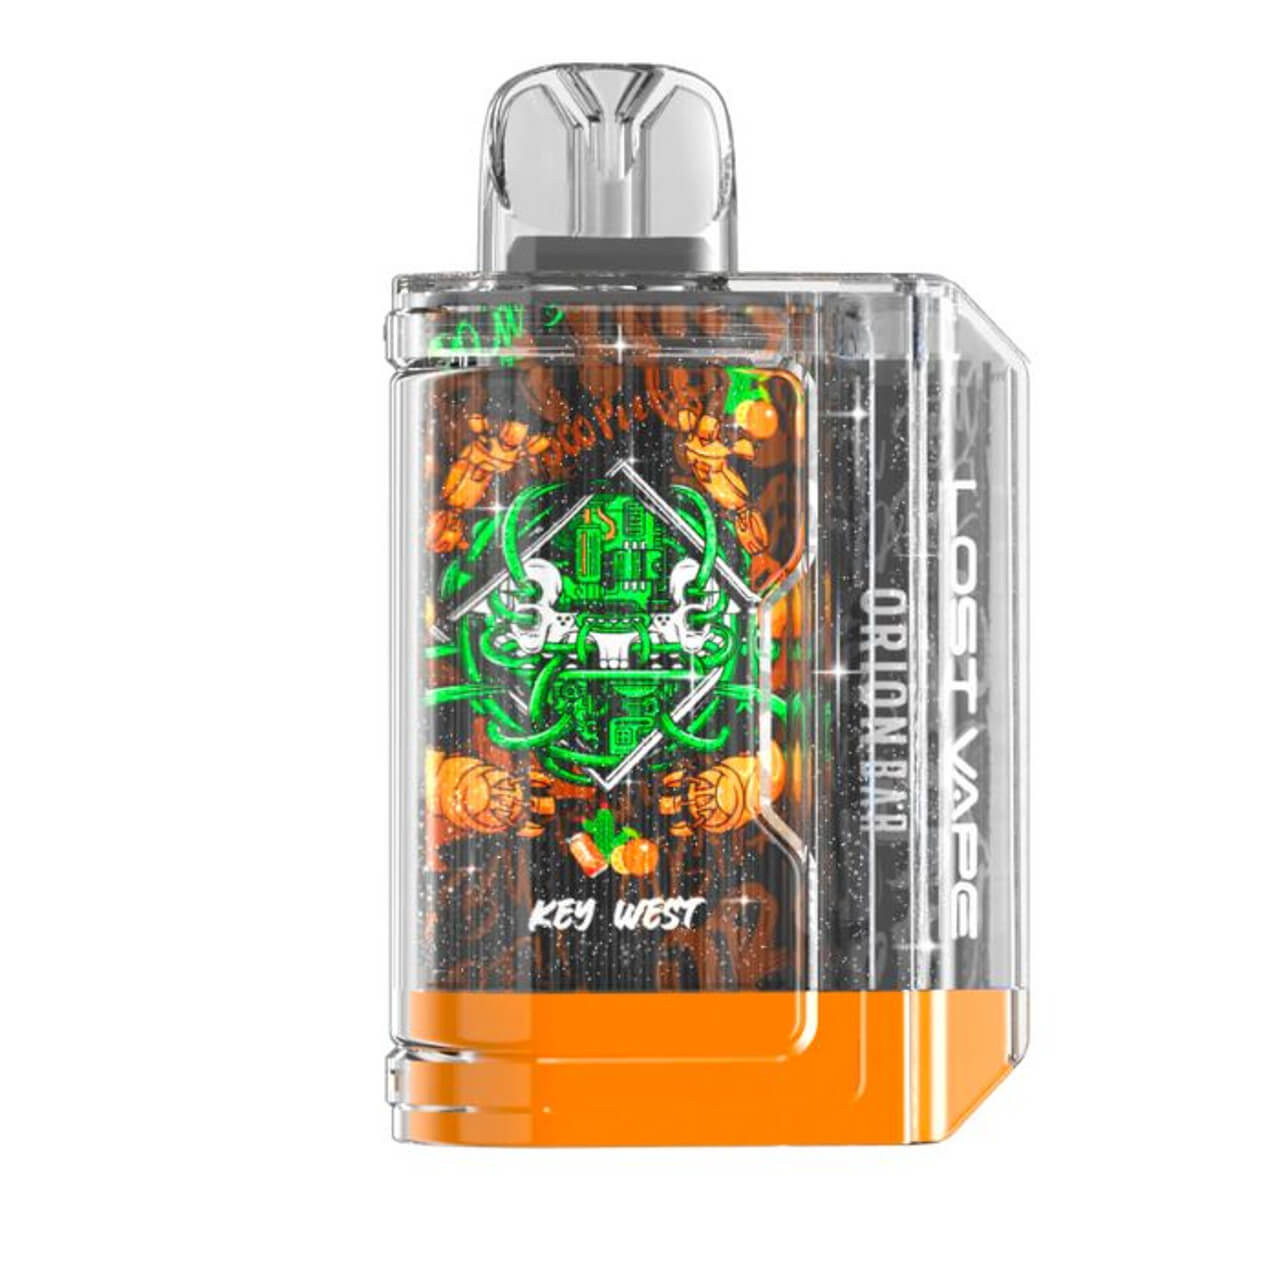 Lost Vape Orion Bar Disposable Device (7500 Puffs) - Key West